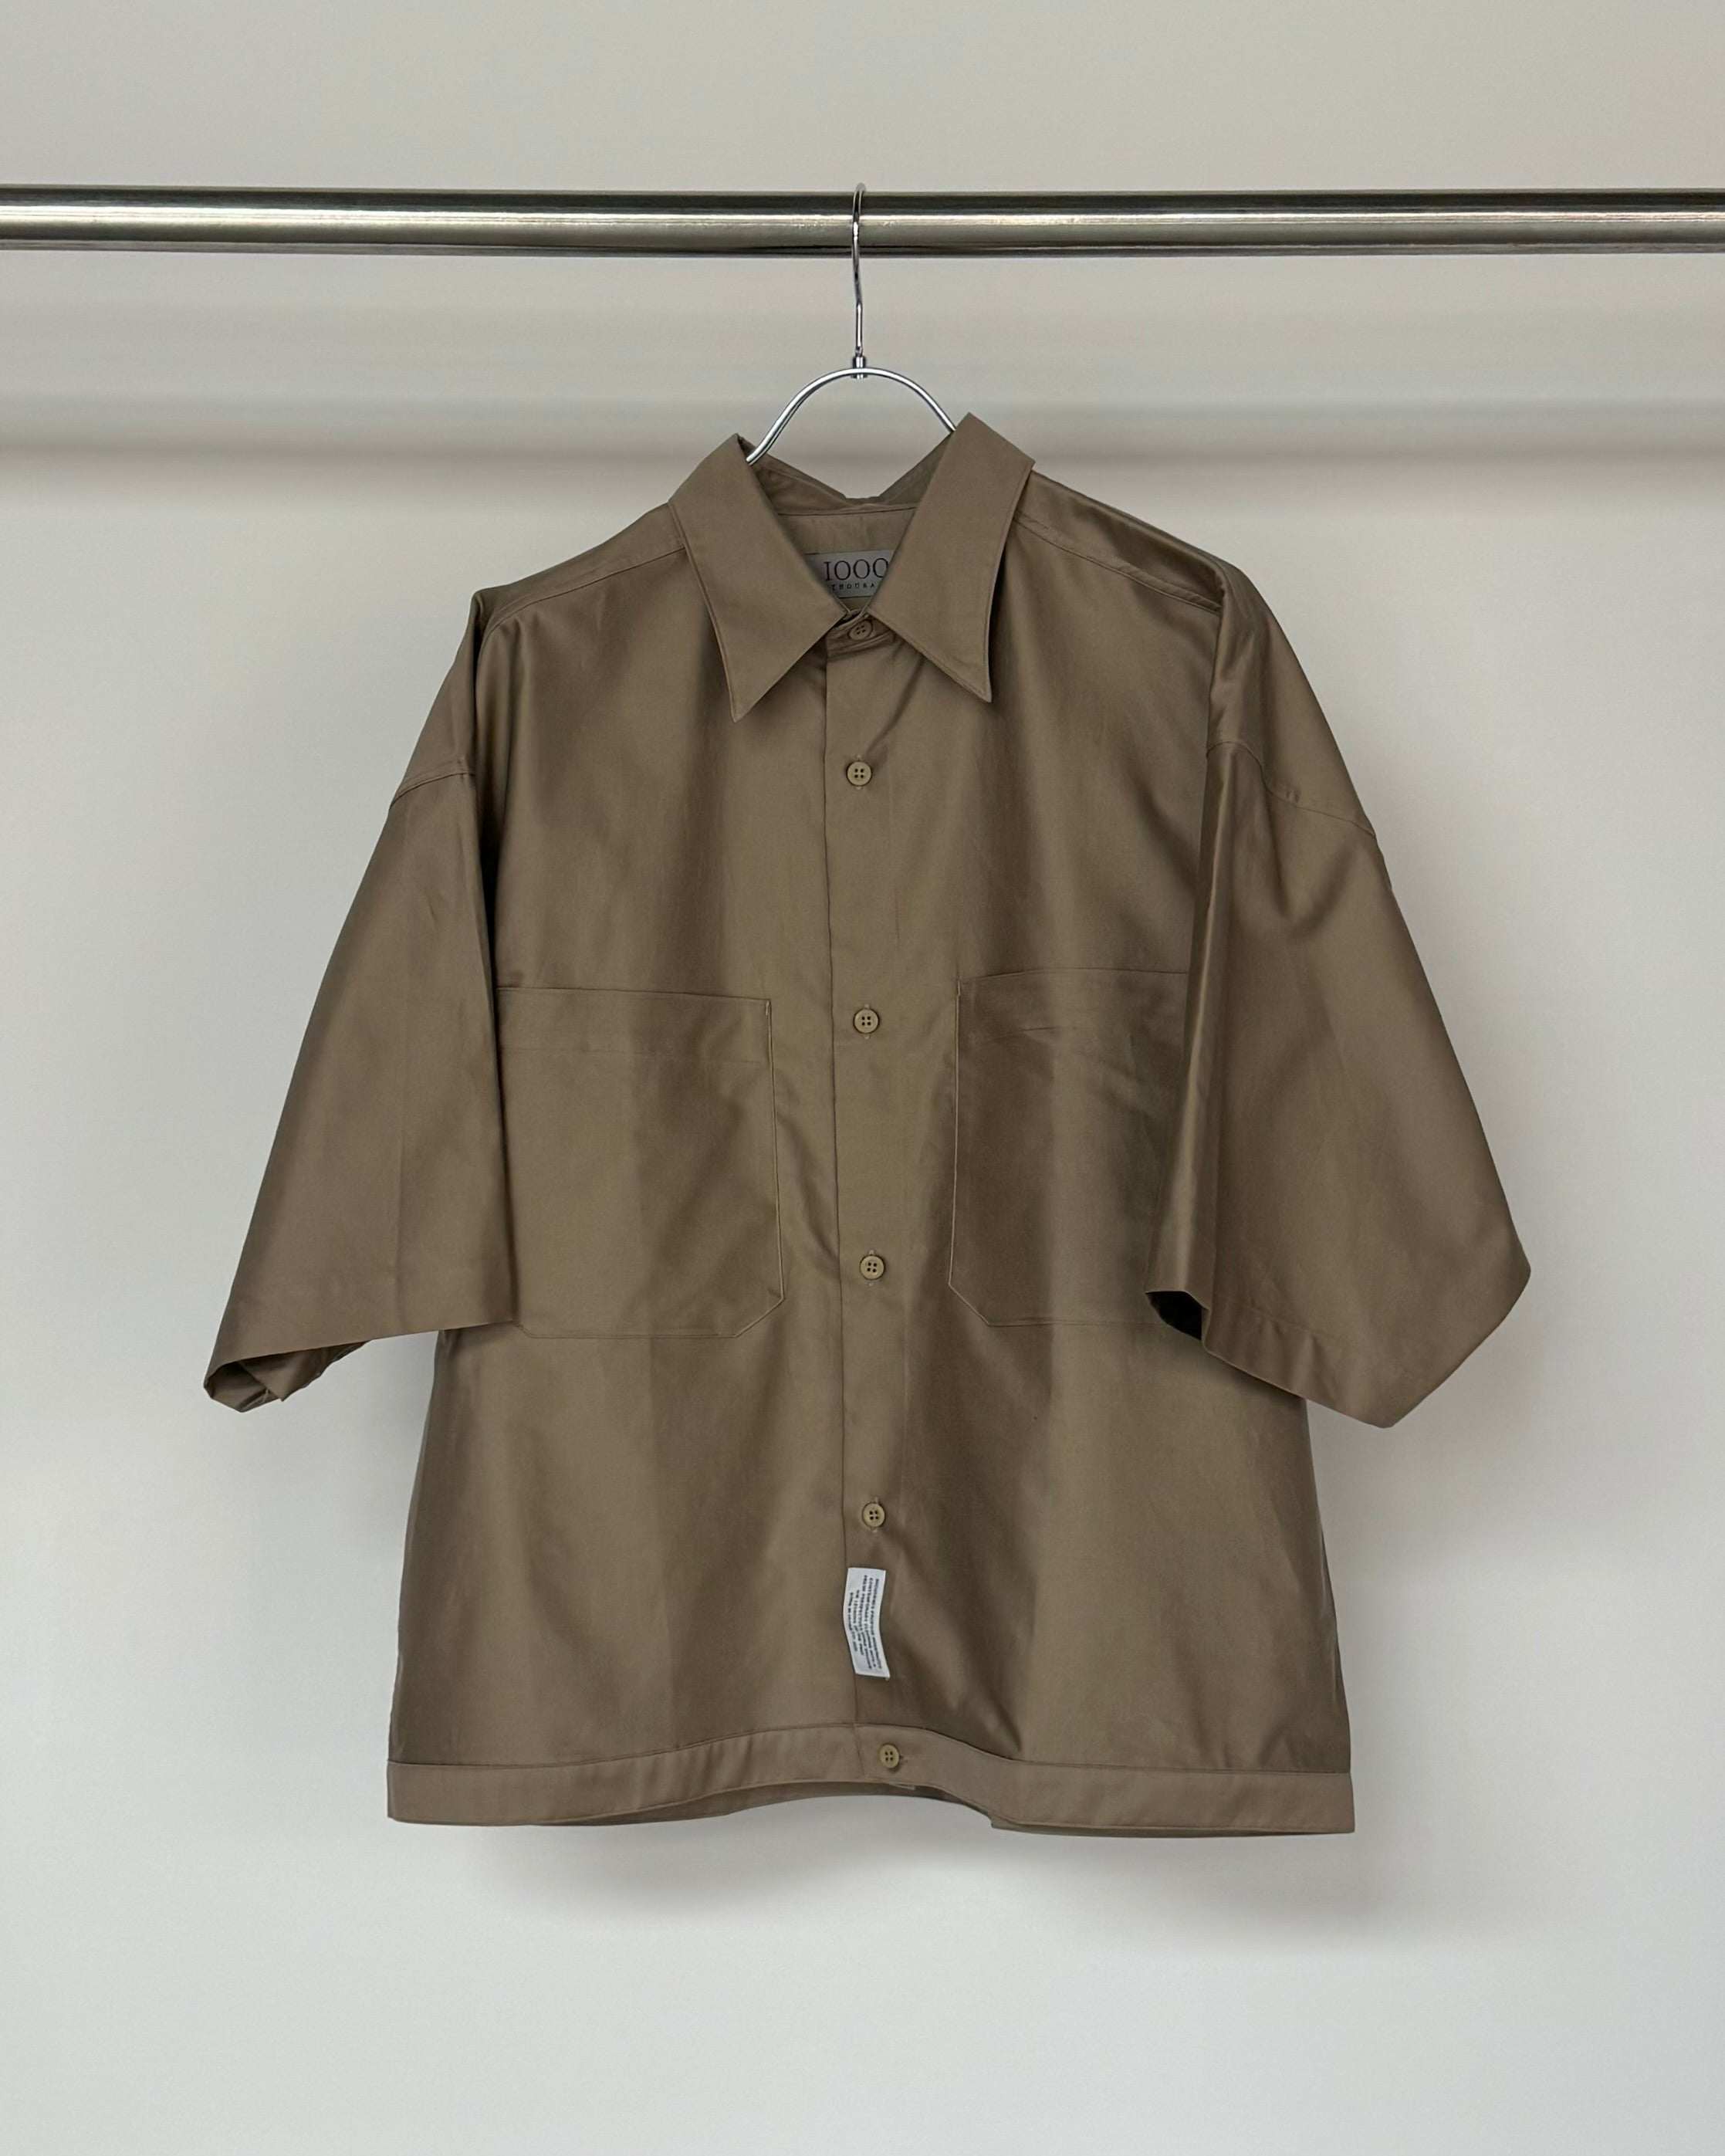 1000s thousands / CROPPED WORK SHIRT SS - STONE BROWN